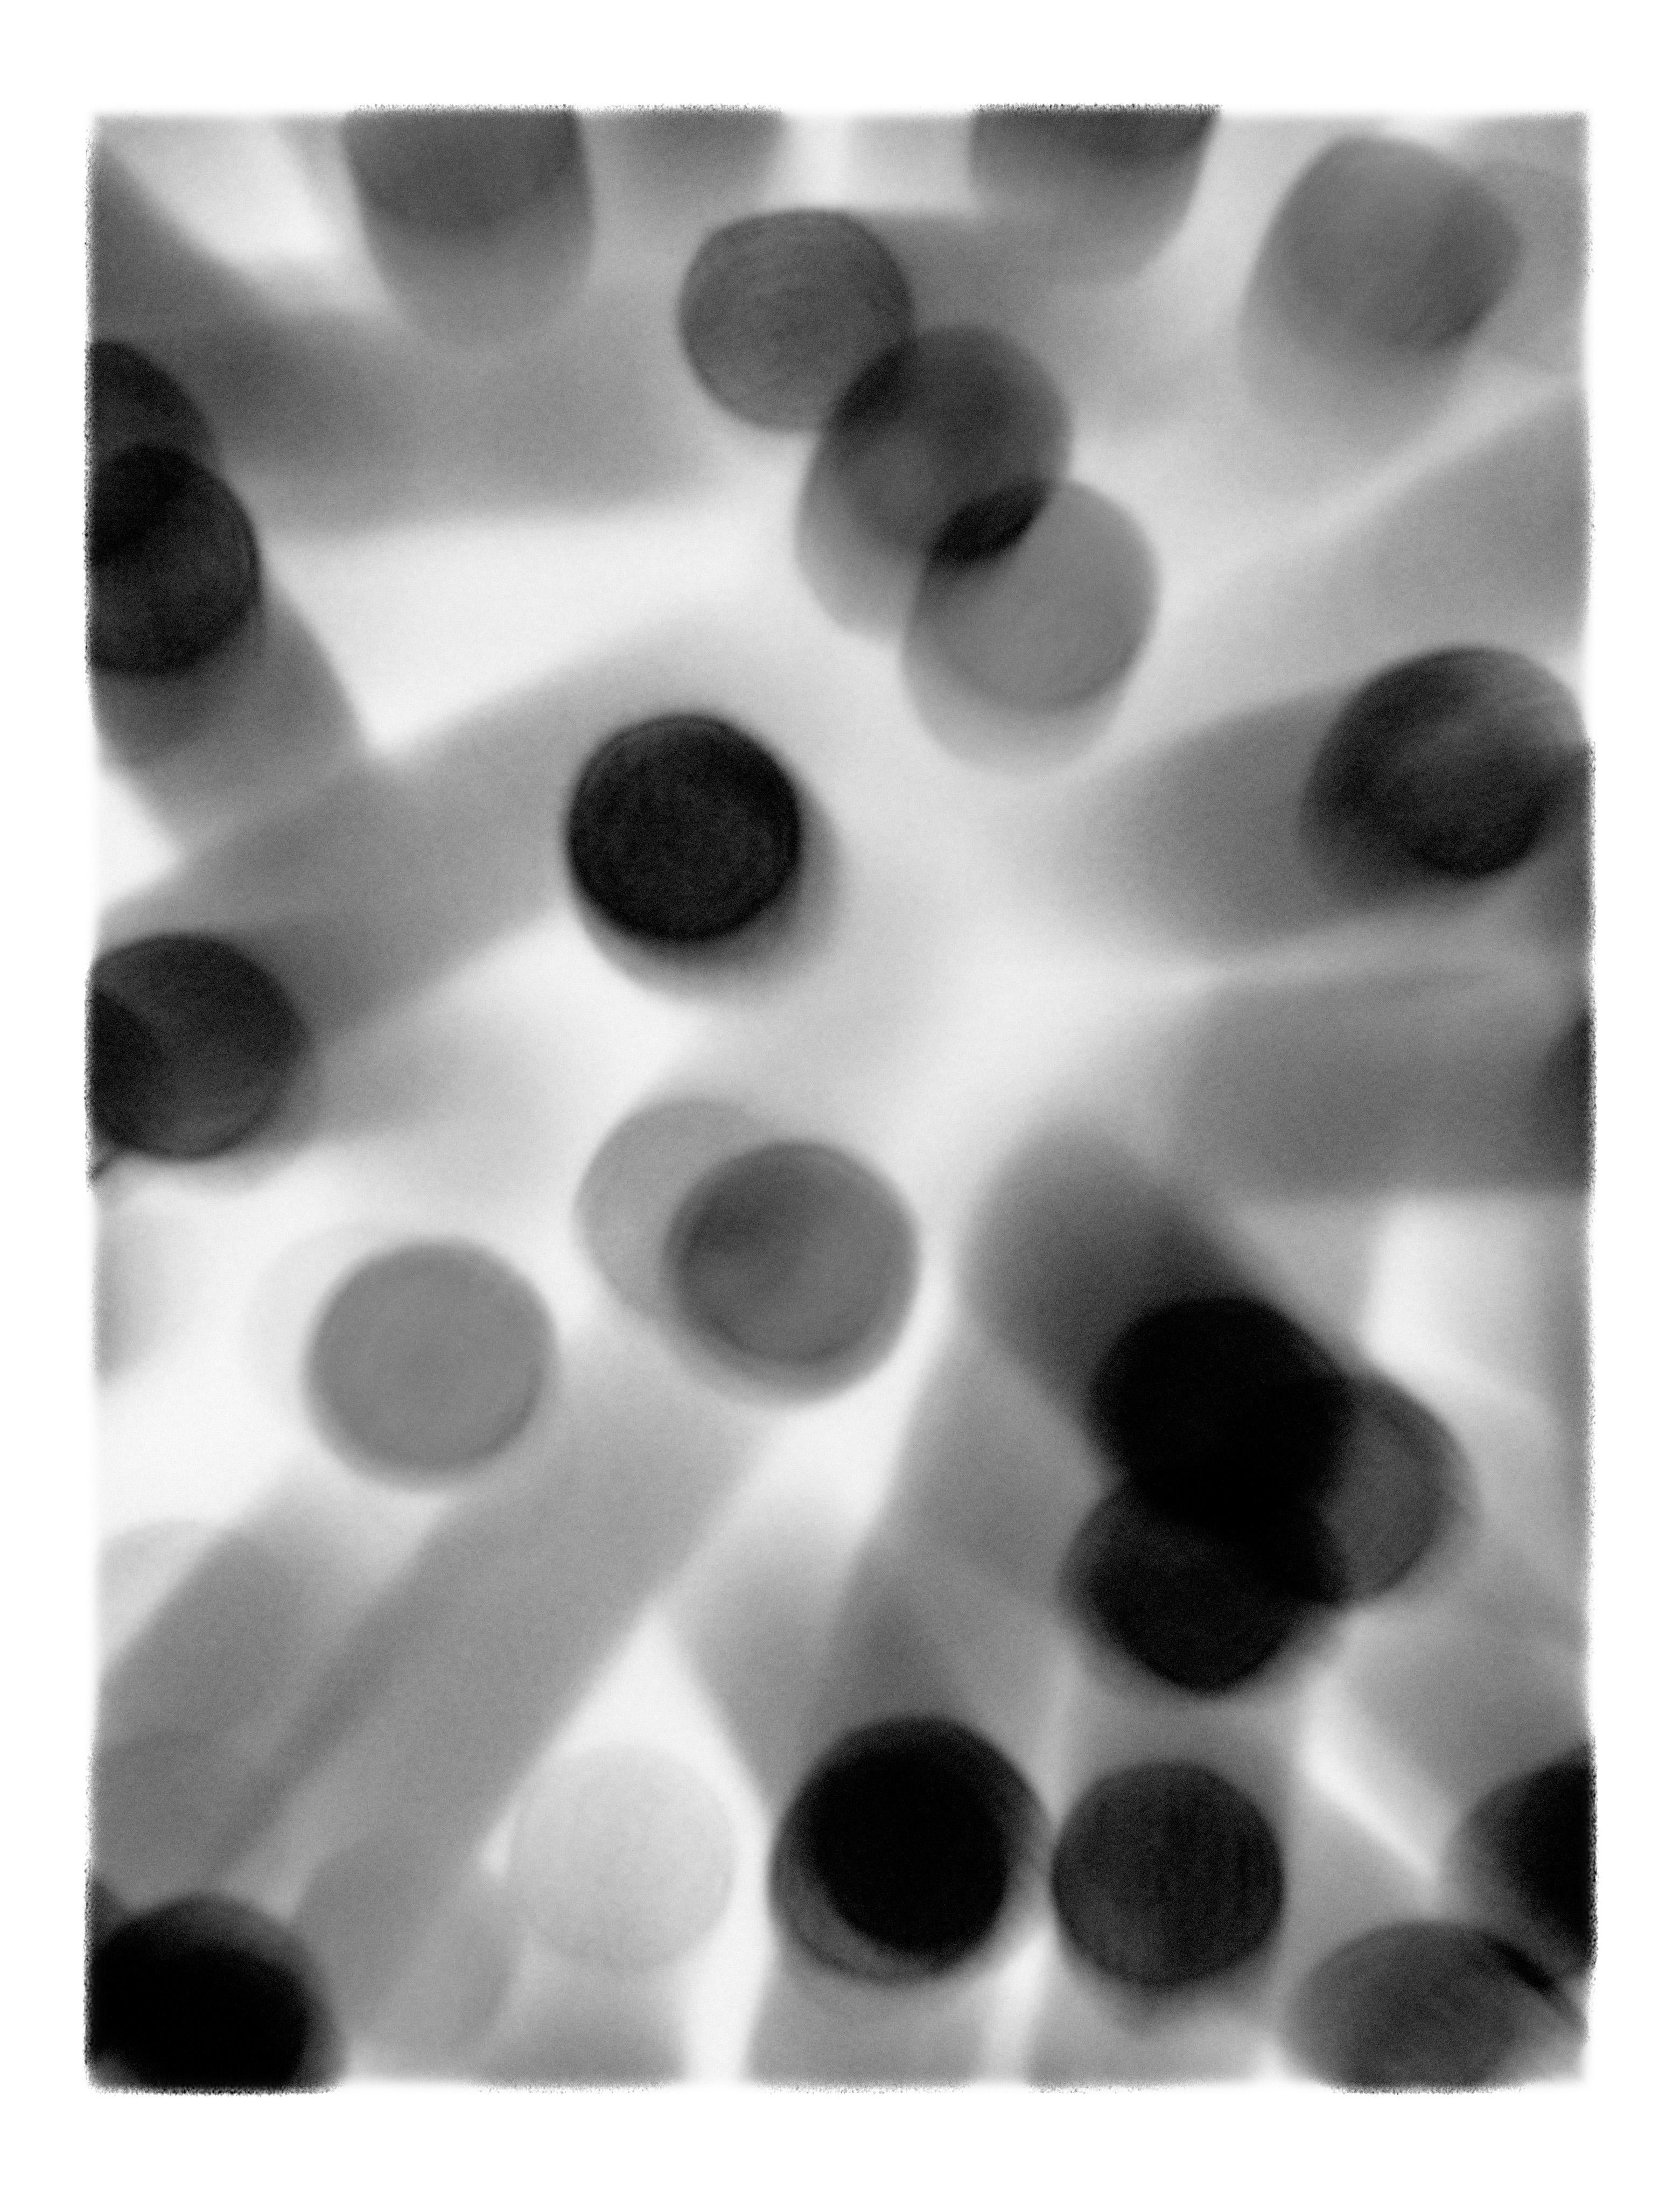 "Underlight Studies, #05" by Lois White is available as a hand-signed and numbered archival pigment print on heavyweight cold press cotton rag paper in the following editions: 
40x52in: edition of 3 
26x38in: edition of 7
22x30in: edition of